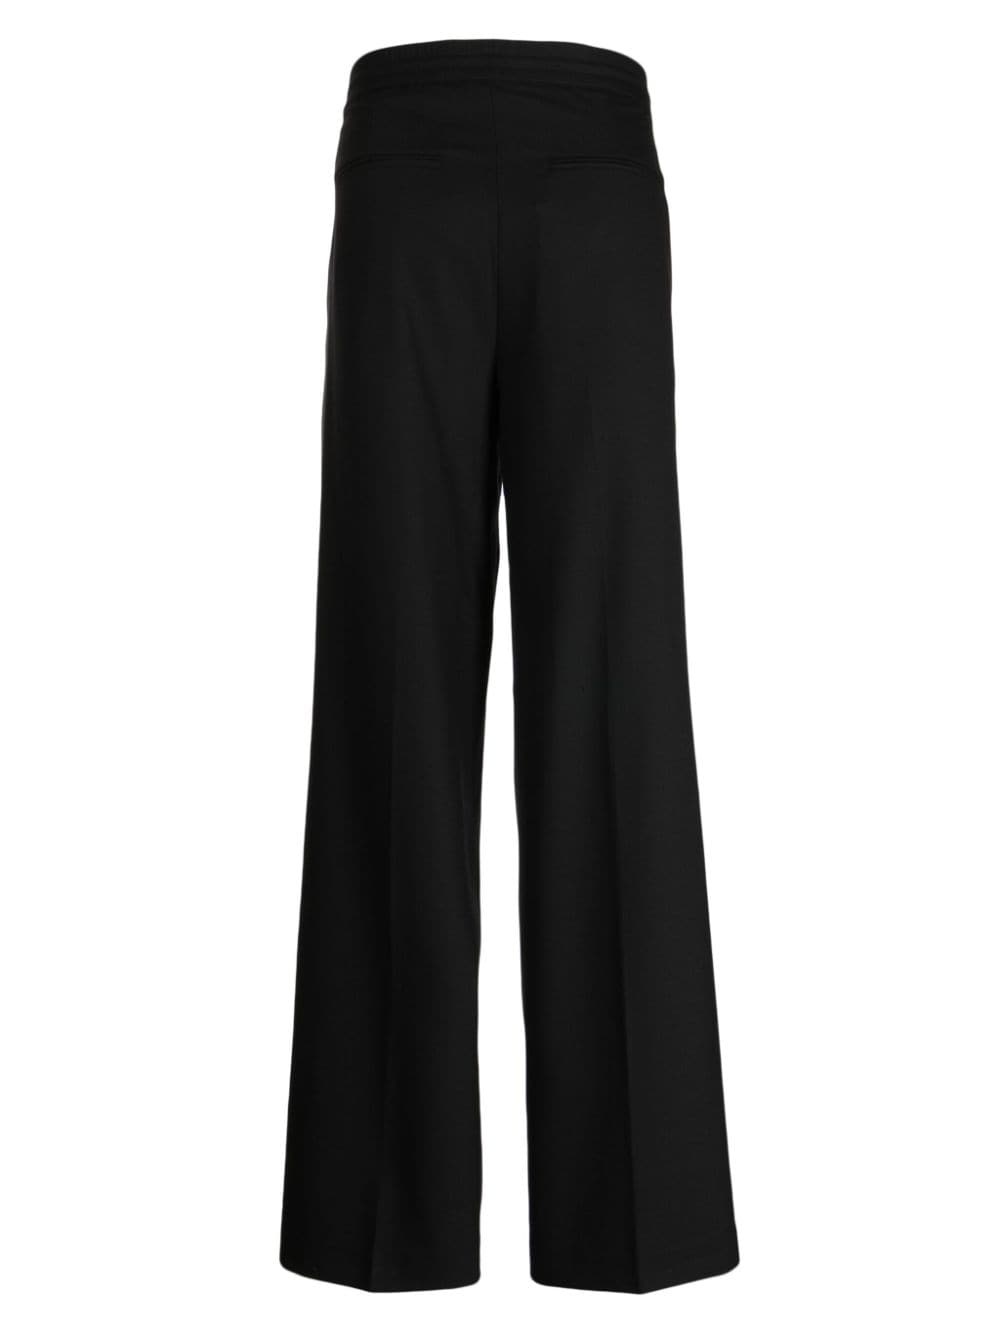 pressed-crease tailored trousers - 2